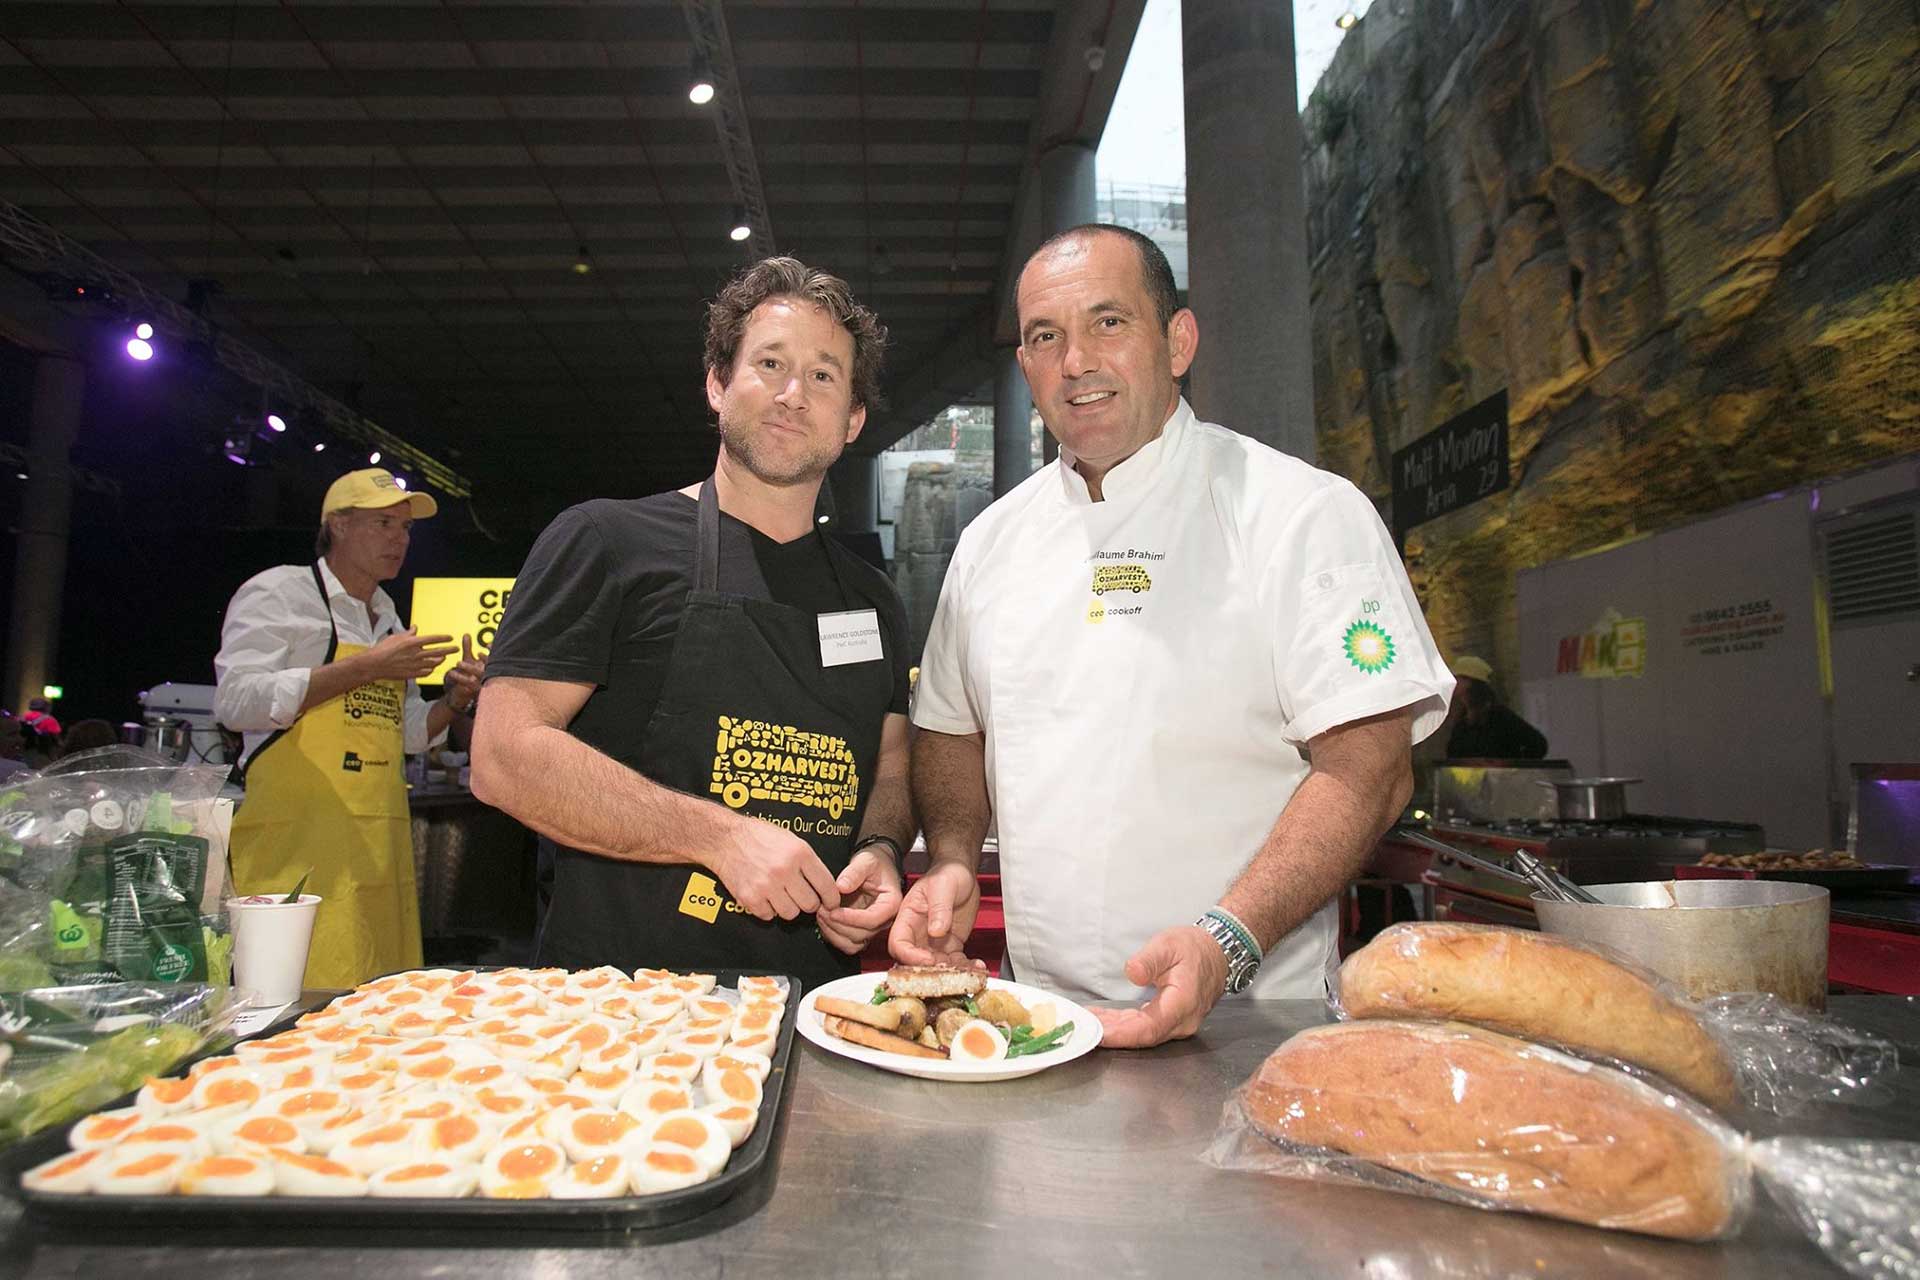 OzHarvest CEO CookOff 2017